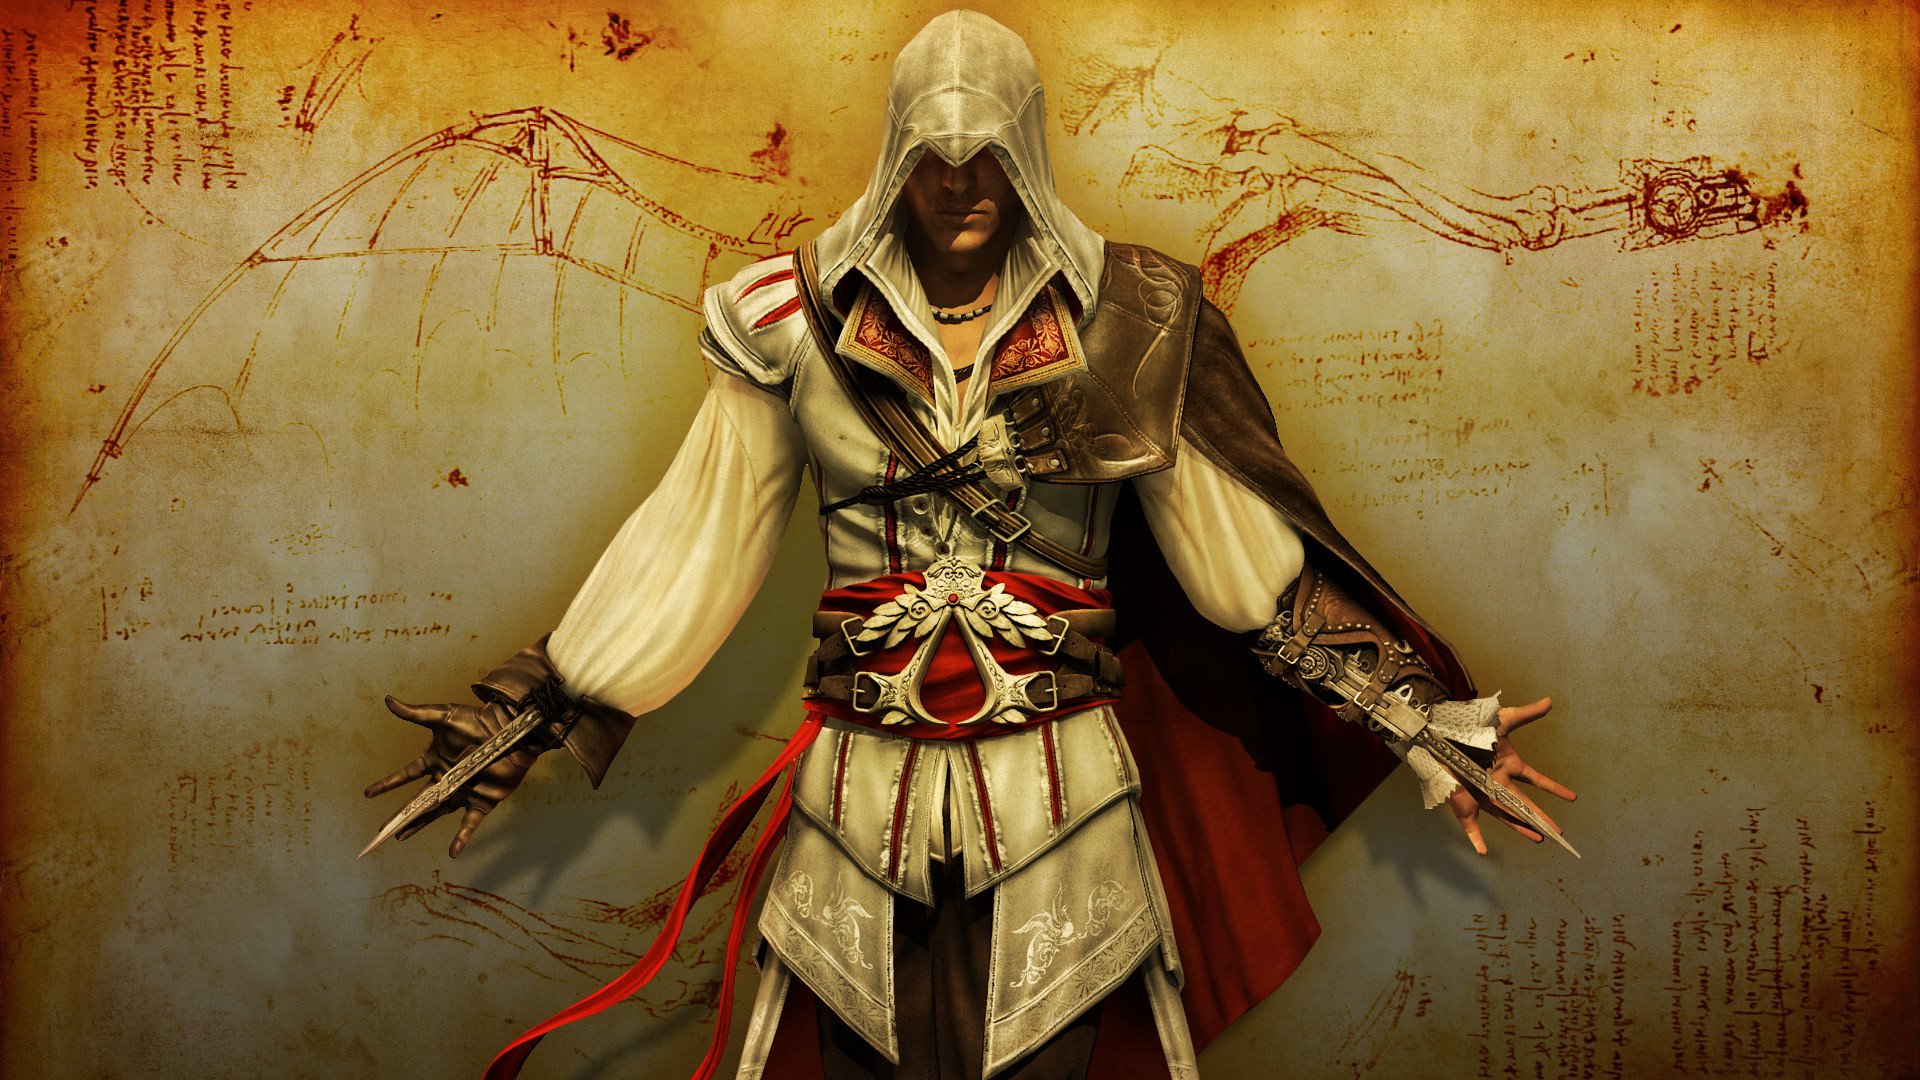 assassins creed 2 Wallpapers